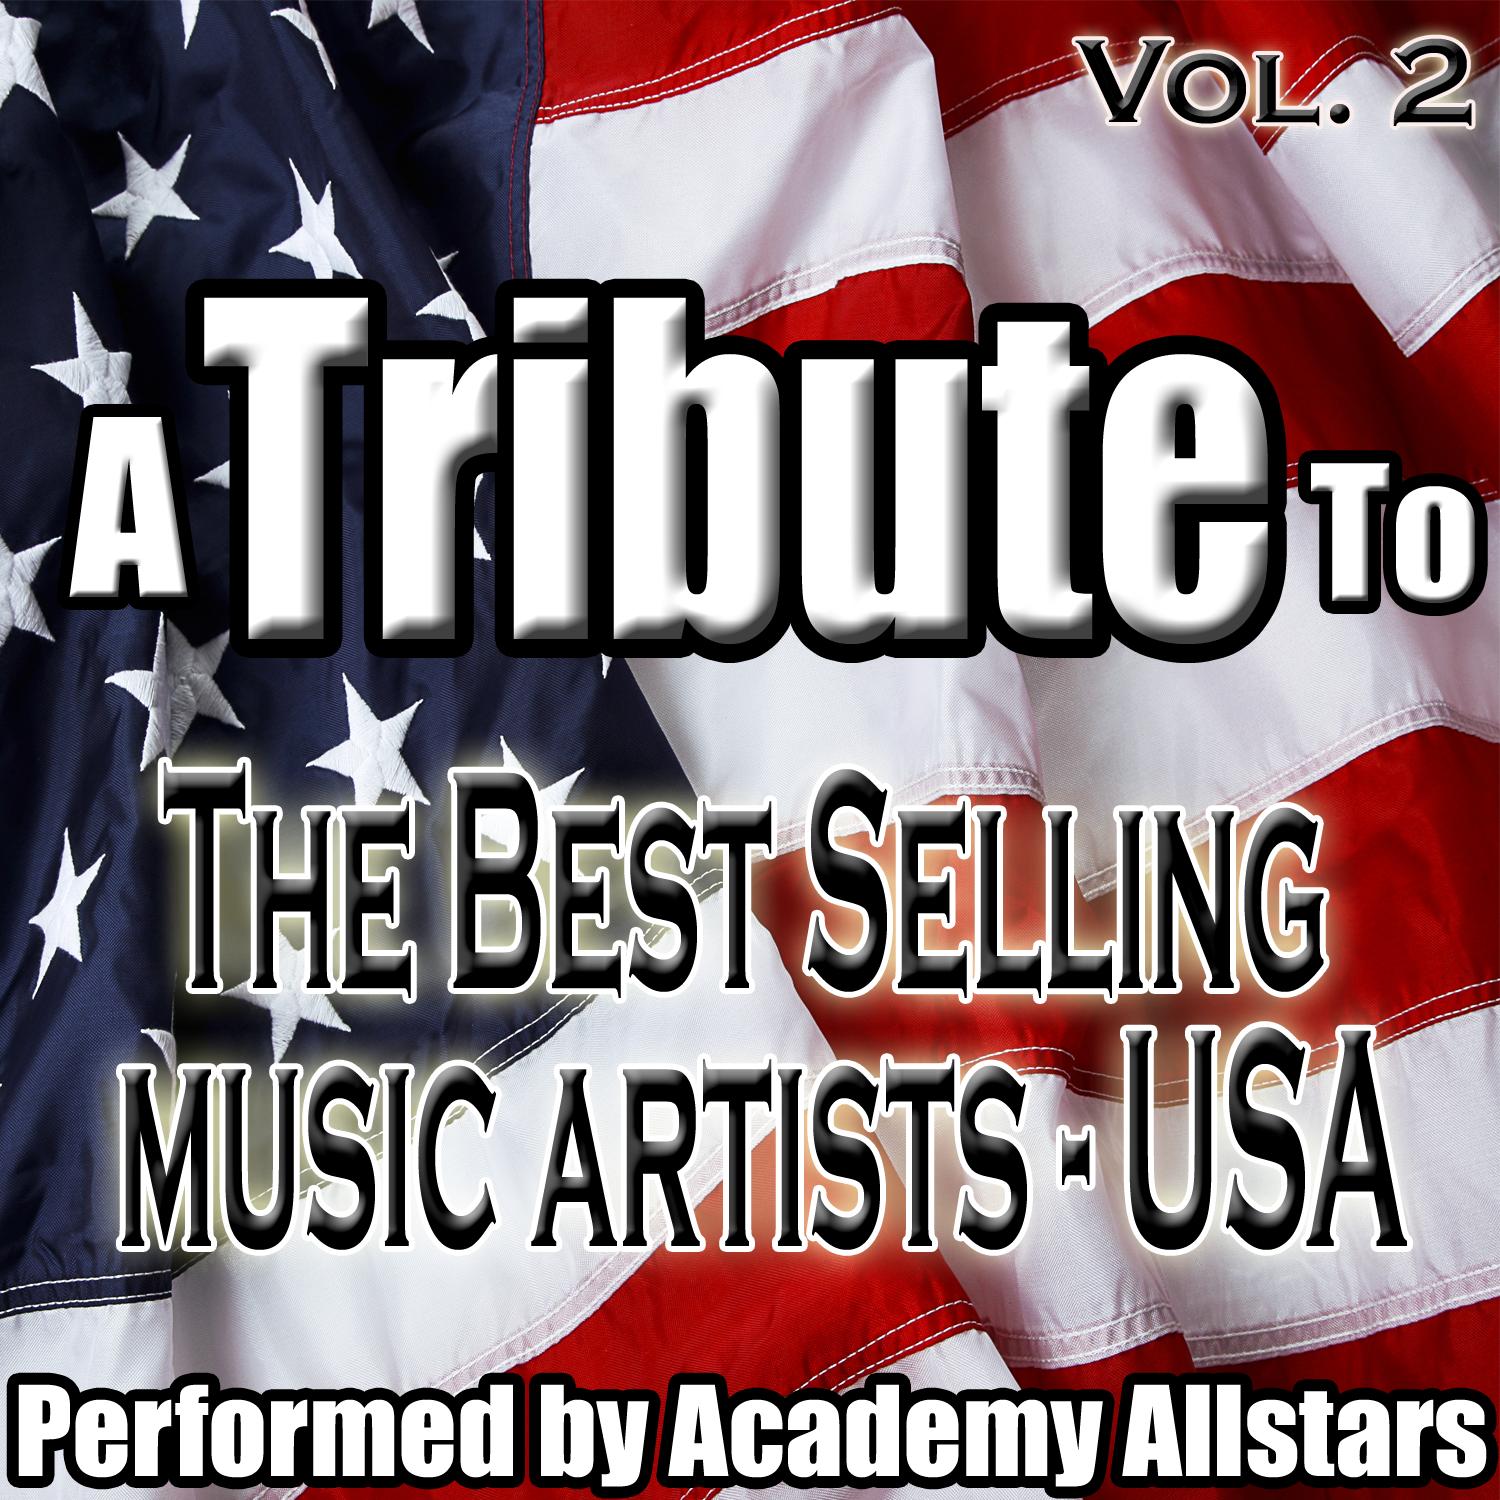 A Tribute to the Best Selling Music Artists USA Vol. 2